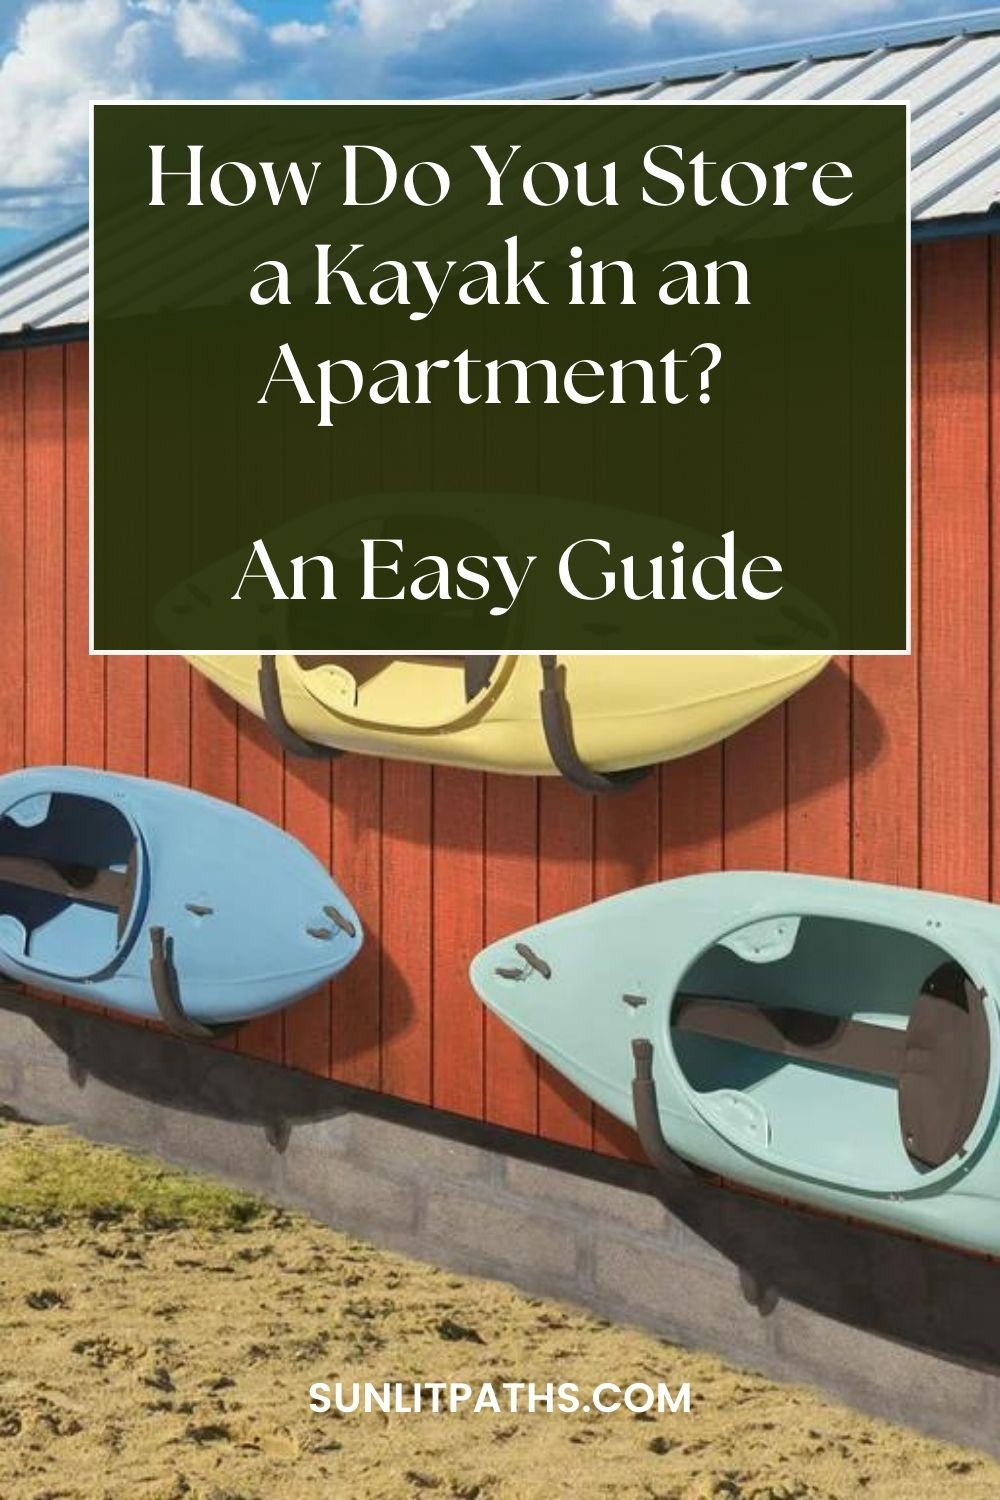 How Do You Store a Kayak in an Apartment